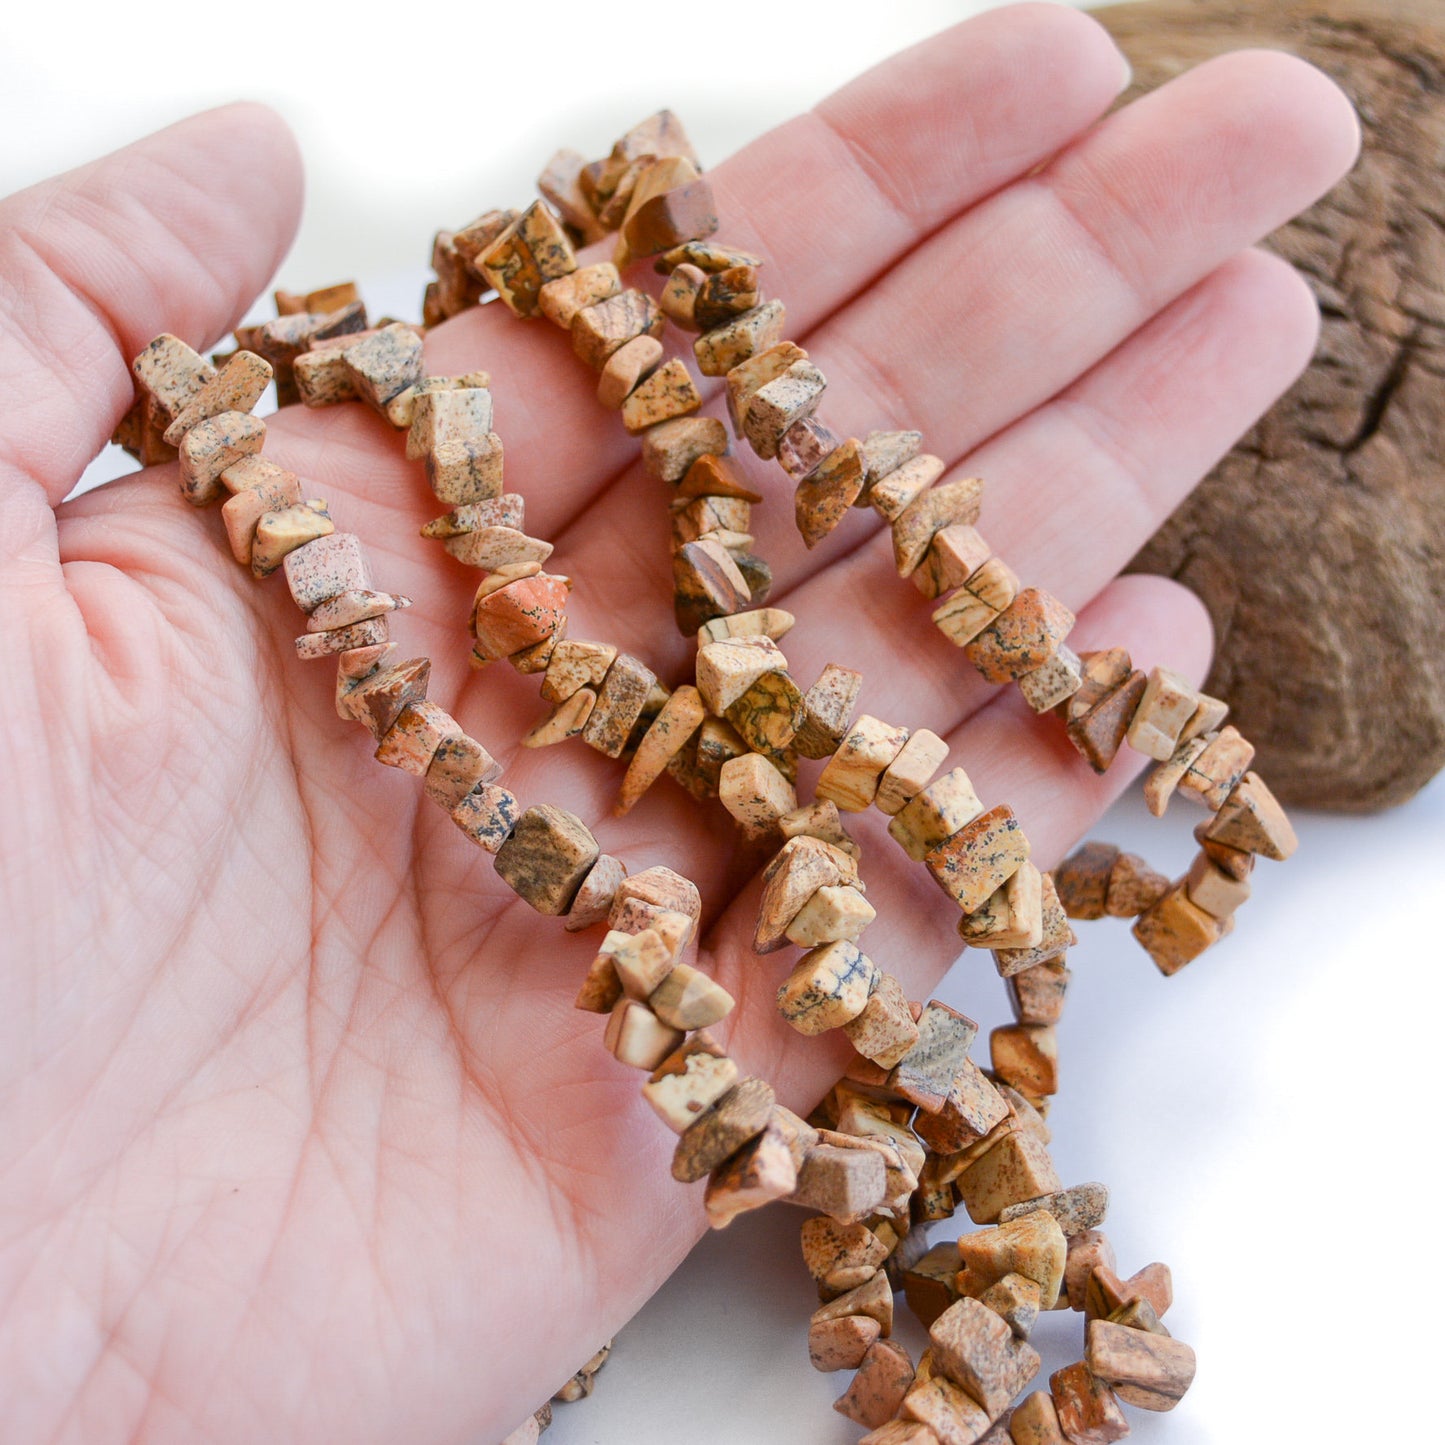 Picture Jasper Chip Beads Natural Sandy Brown and Tan Colored Gemstone Beads, Bulk Lot 34 Inches Long, Pretty DIY Beads for Jewelry Making